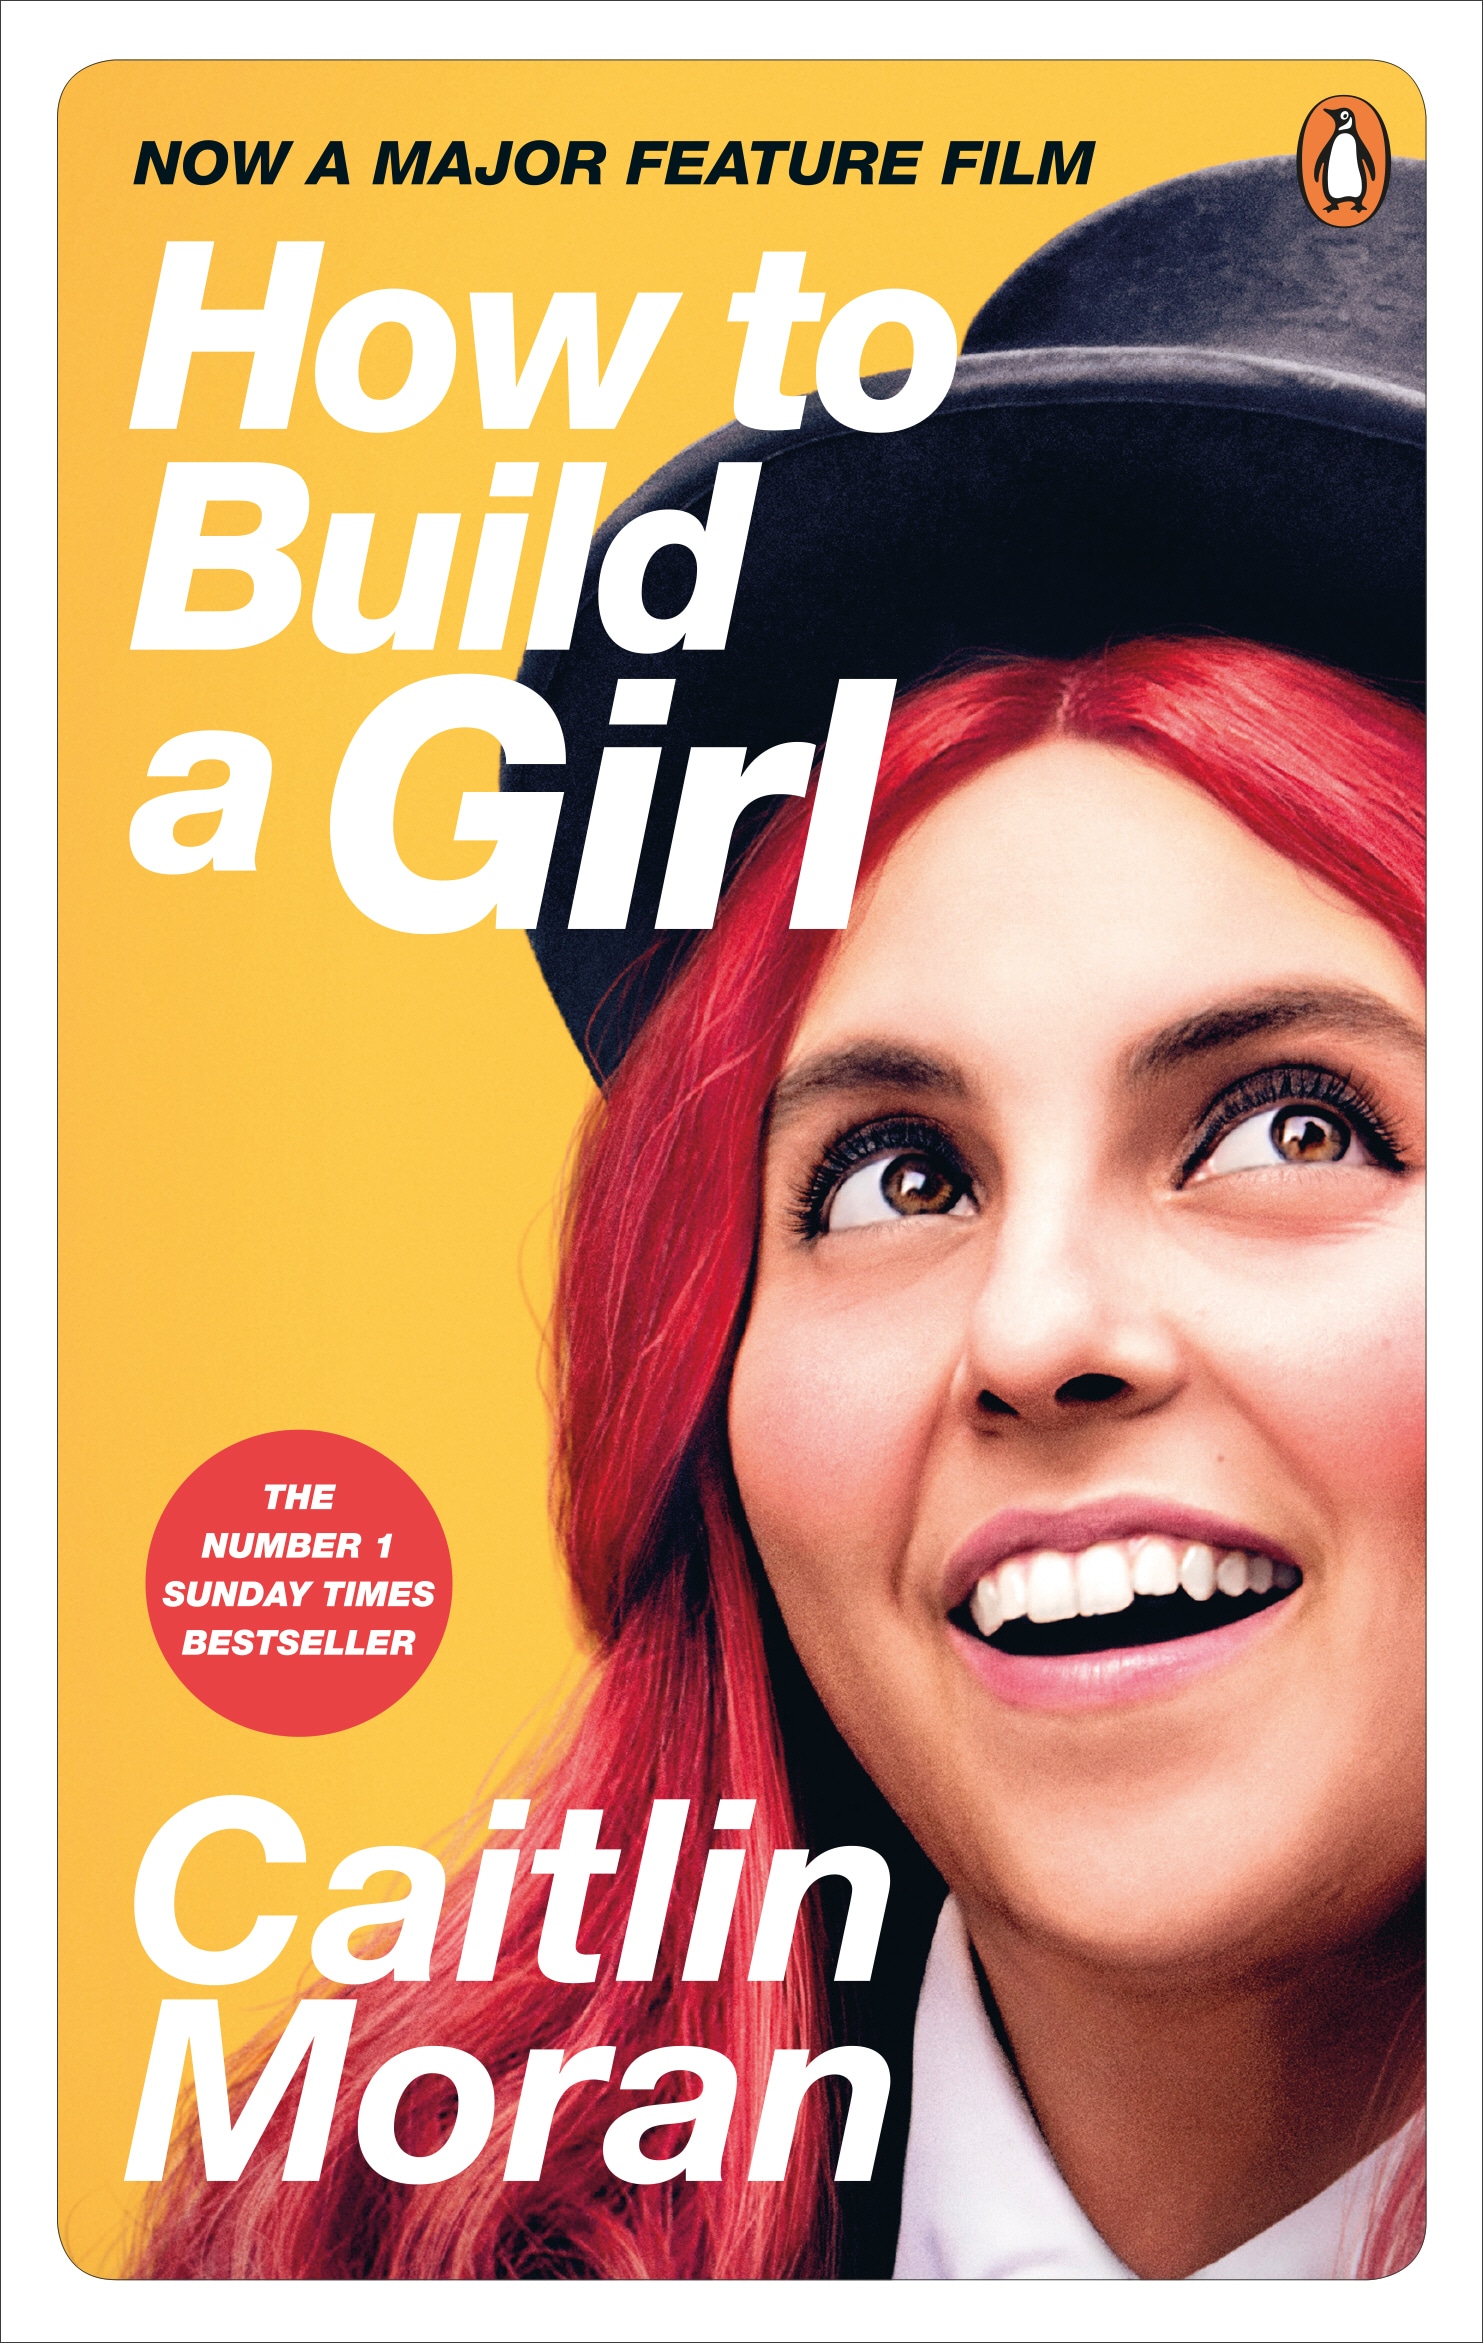 Book “How to Build a Girl” by Caitlin Moran — May 14, 2020